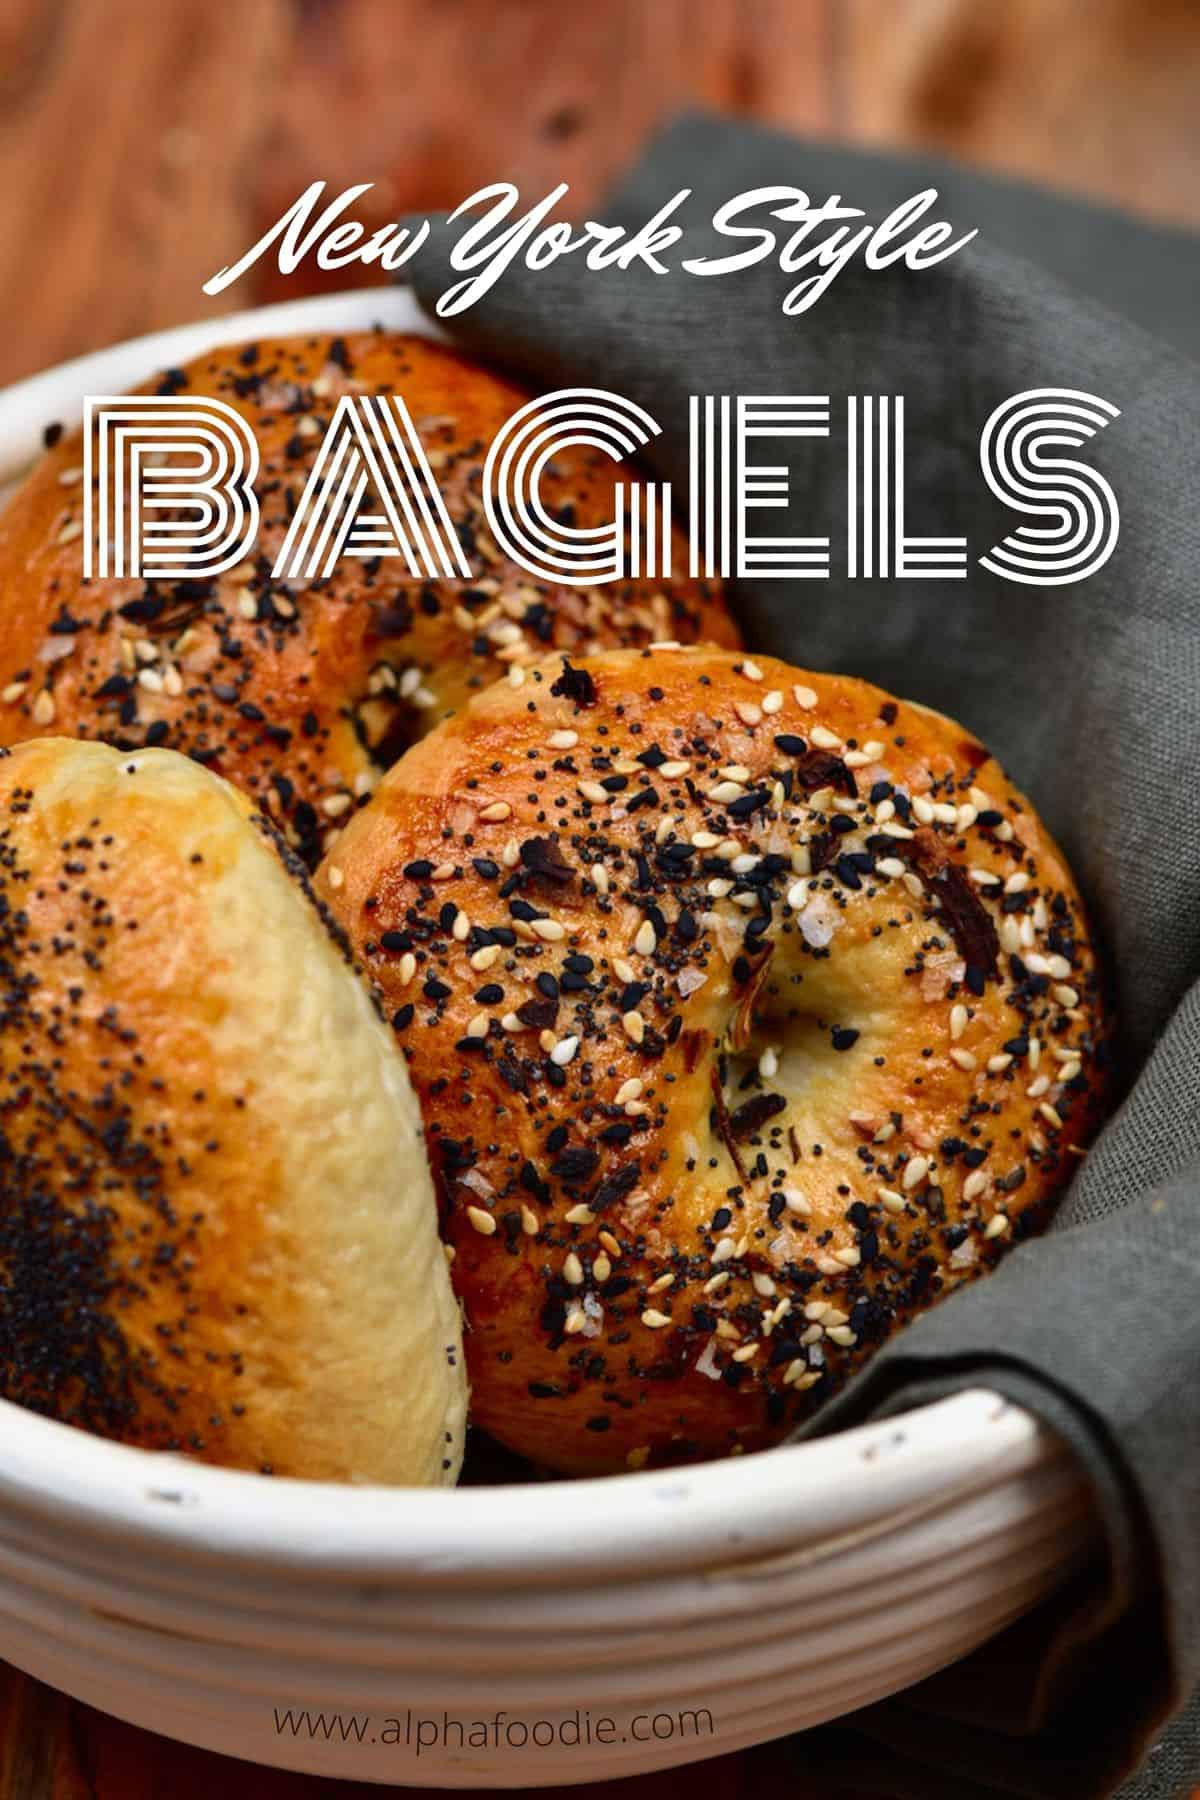 Homemade New York-Style Bagels (NY Bagel Recipe) - Alphafoodie